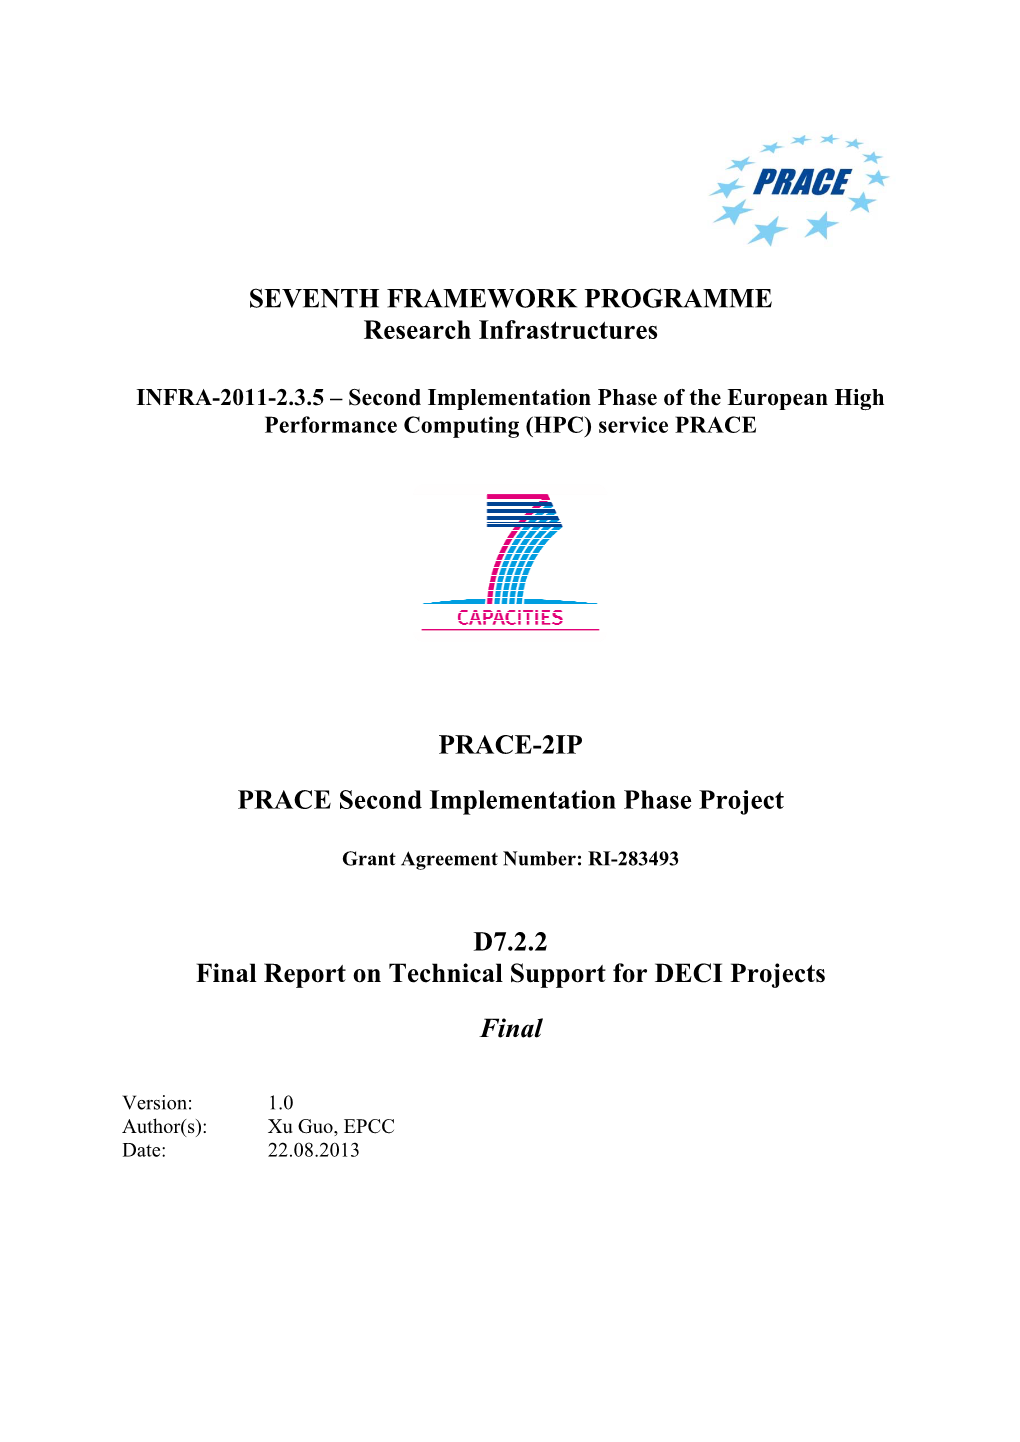 D7.2.2: Final Report on Technical Support for DECI Projects